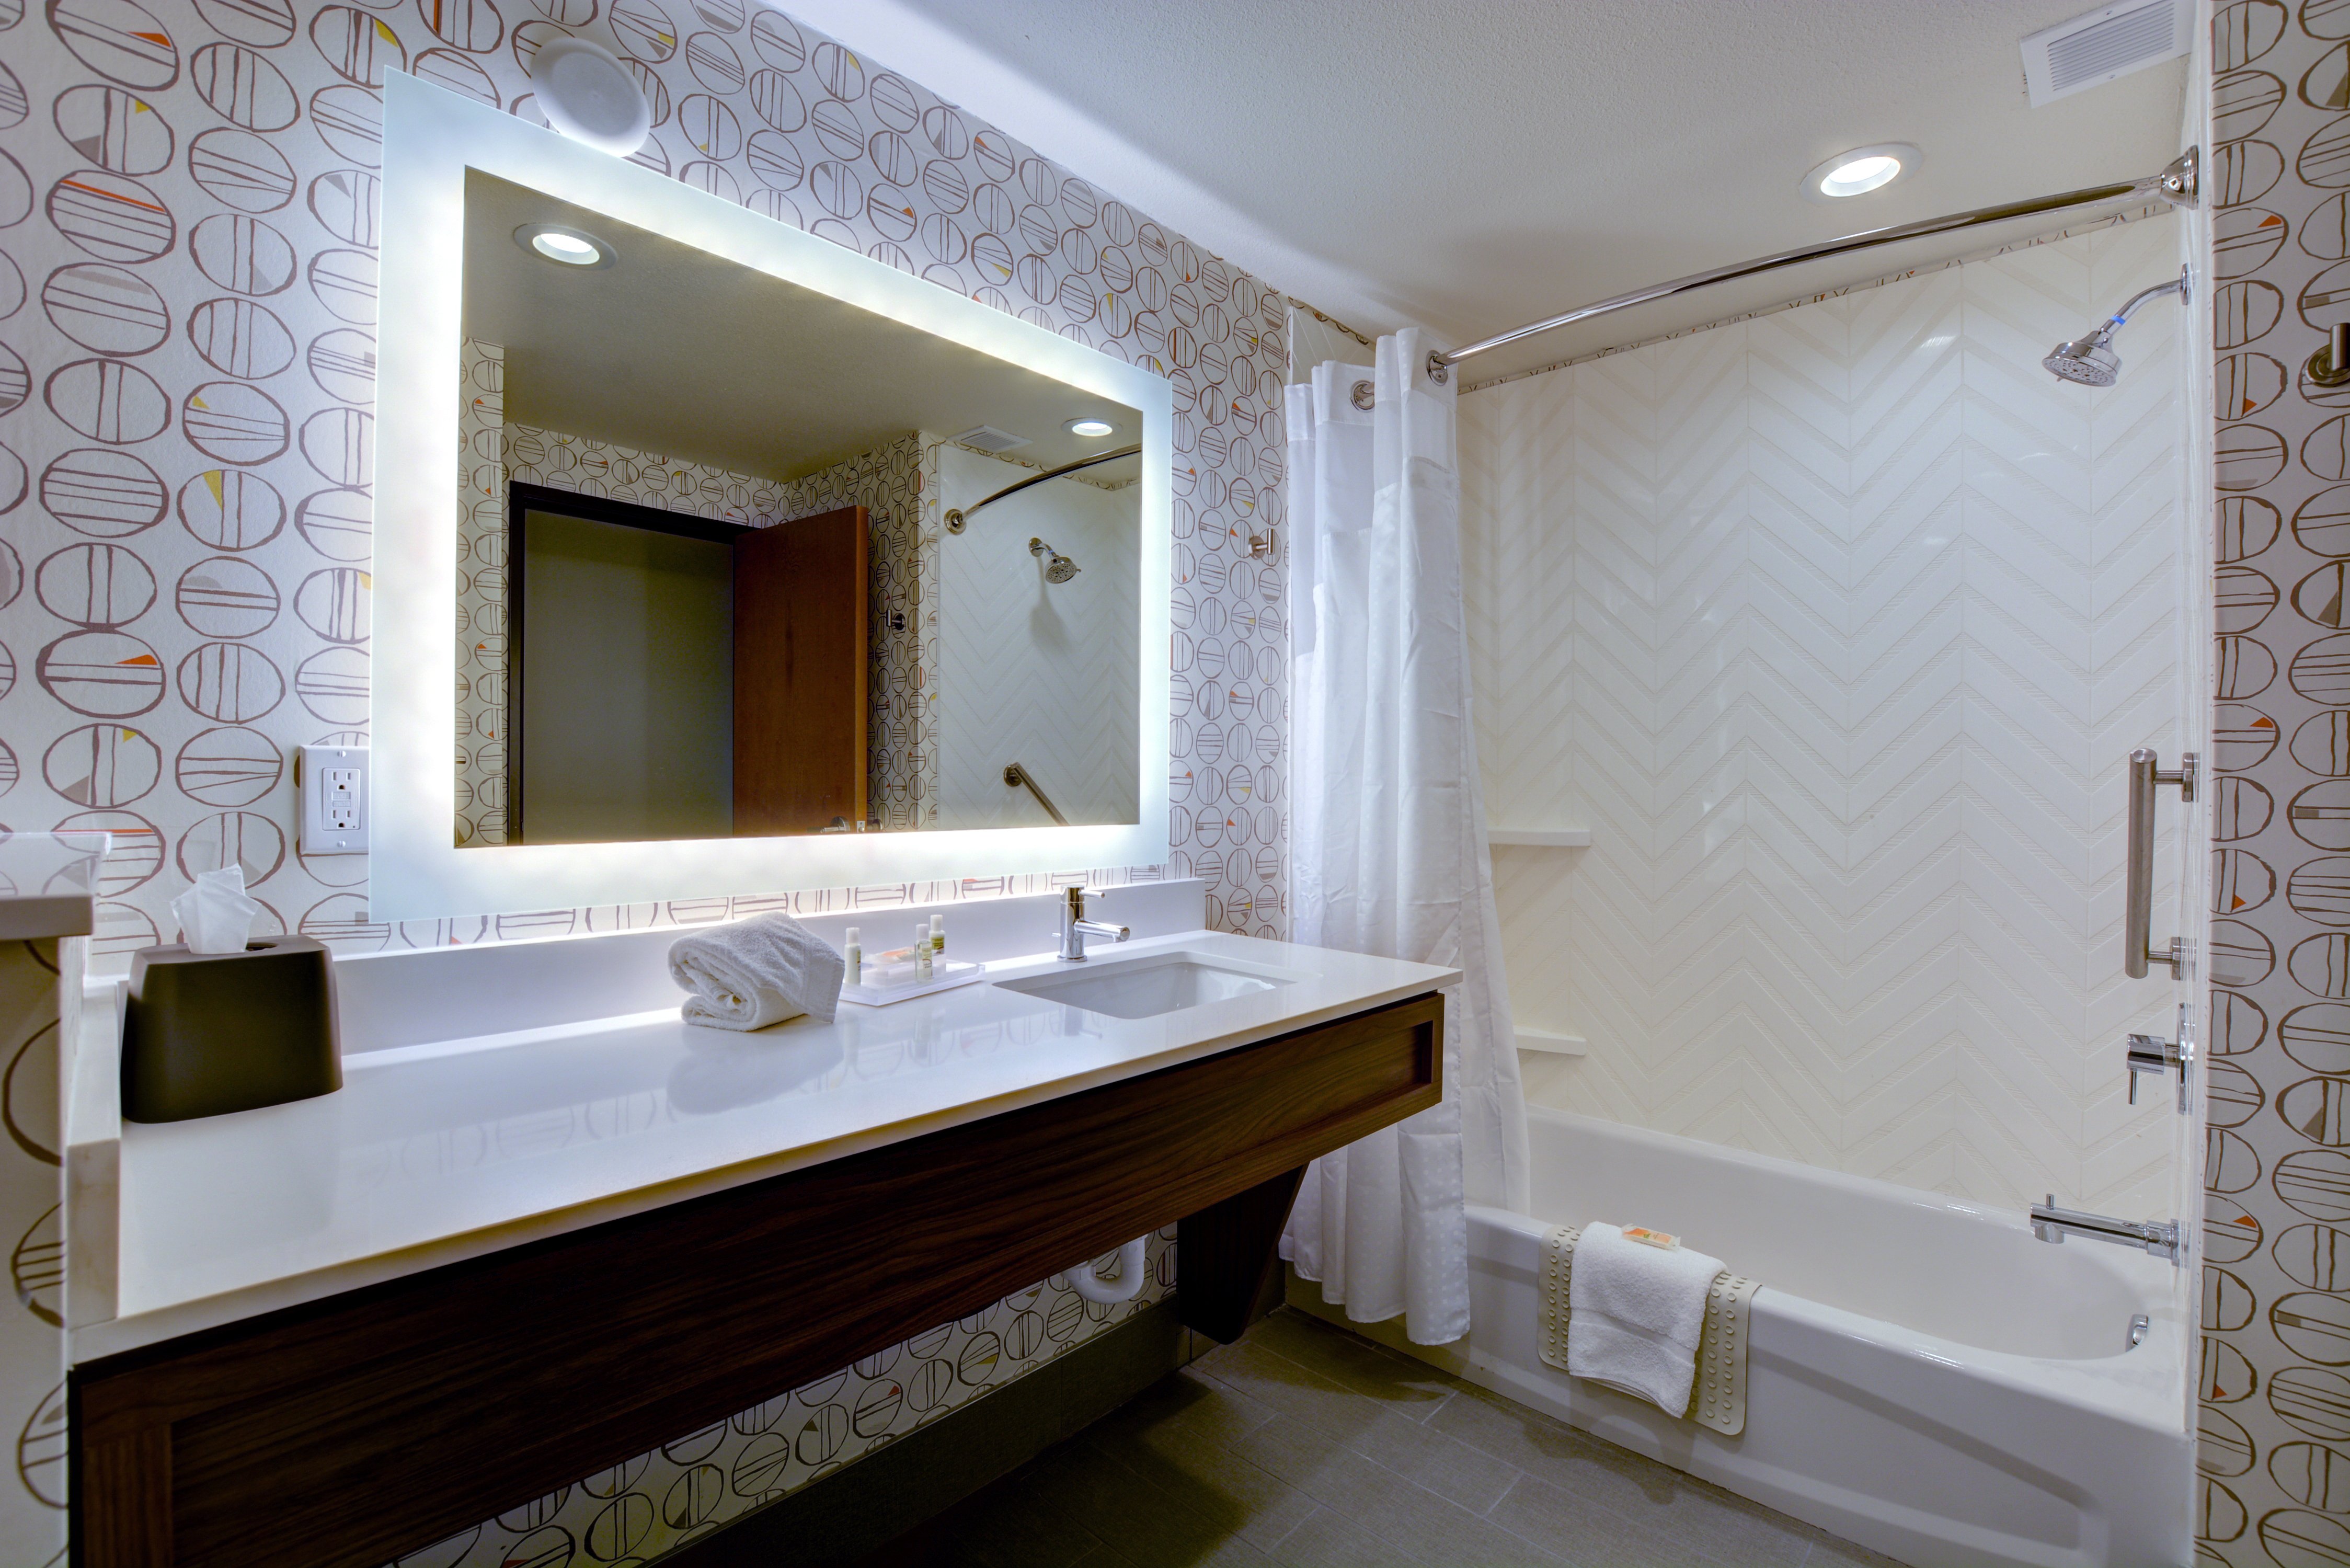 New guest bathrooms have the perfect lighting to start your day!